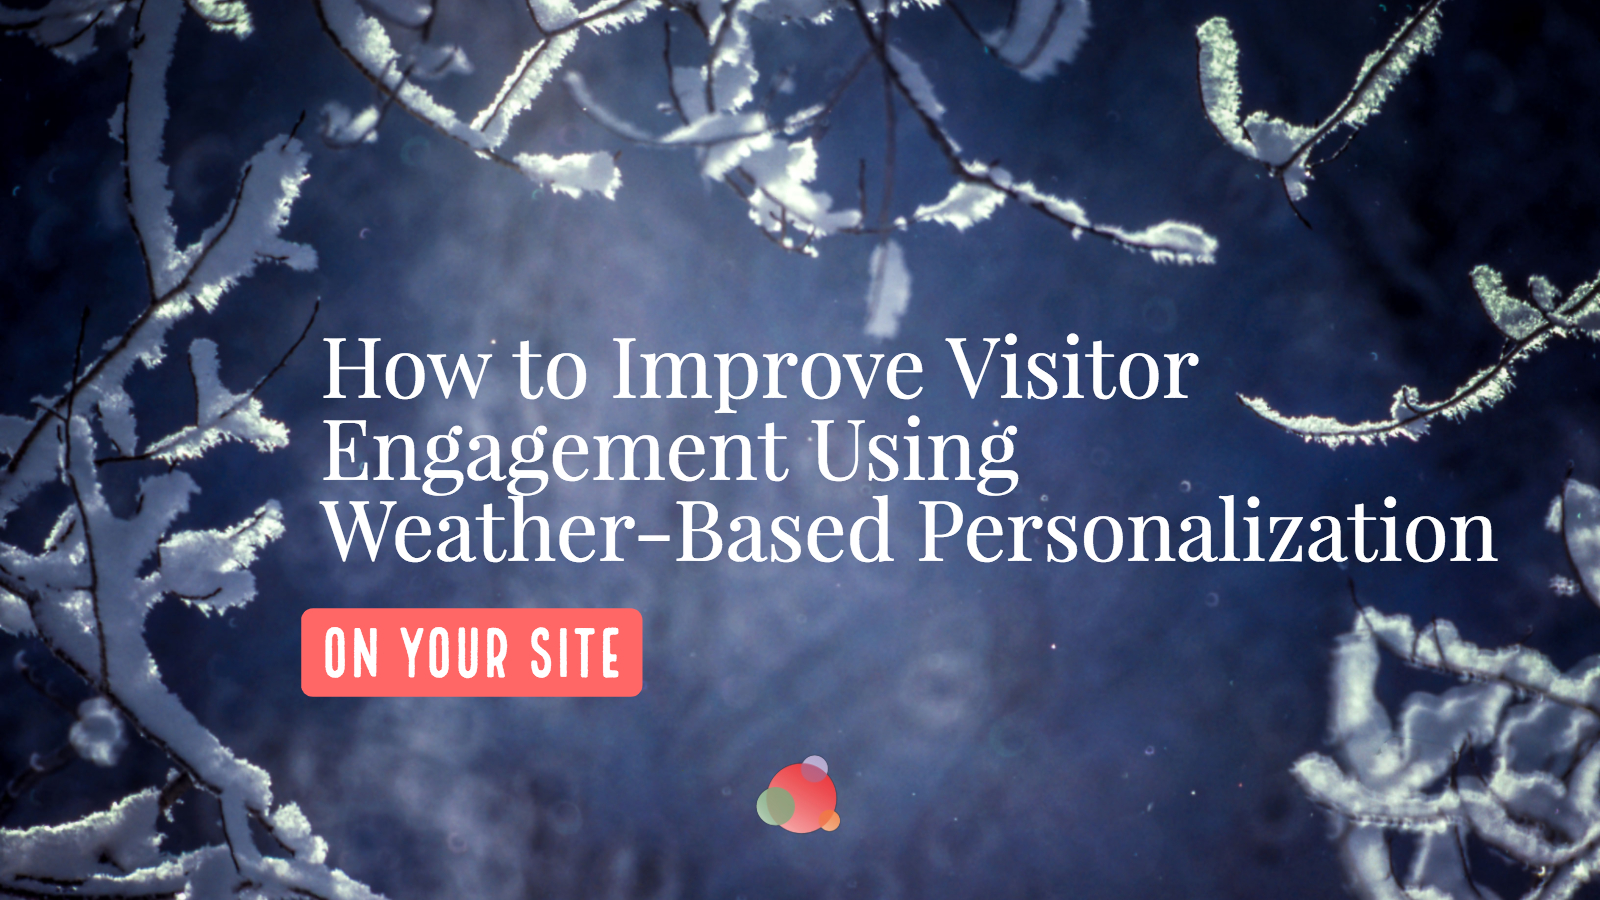 Weather-based Personalization Improves Visitor Engagement